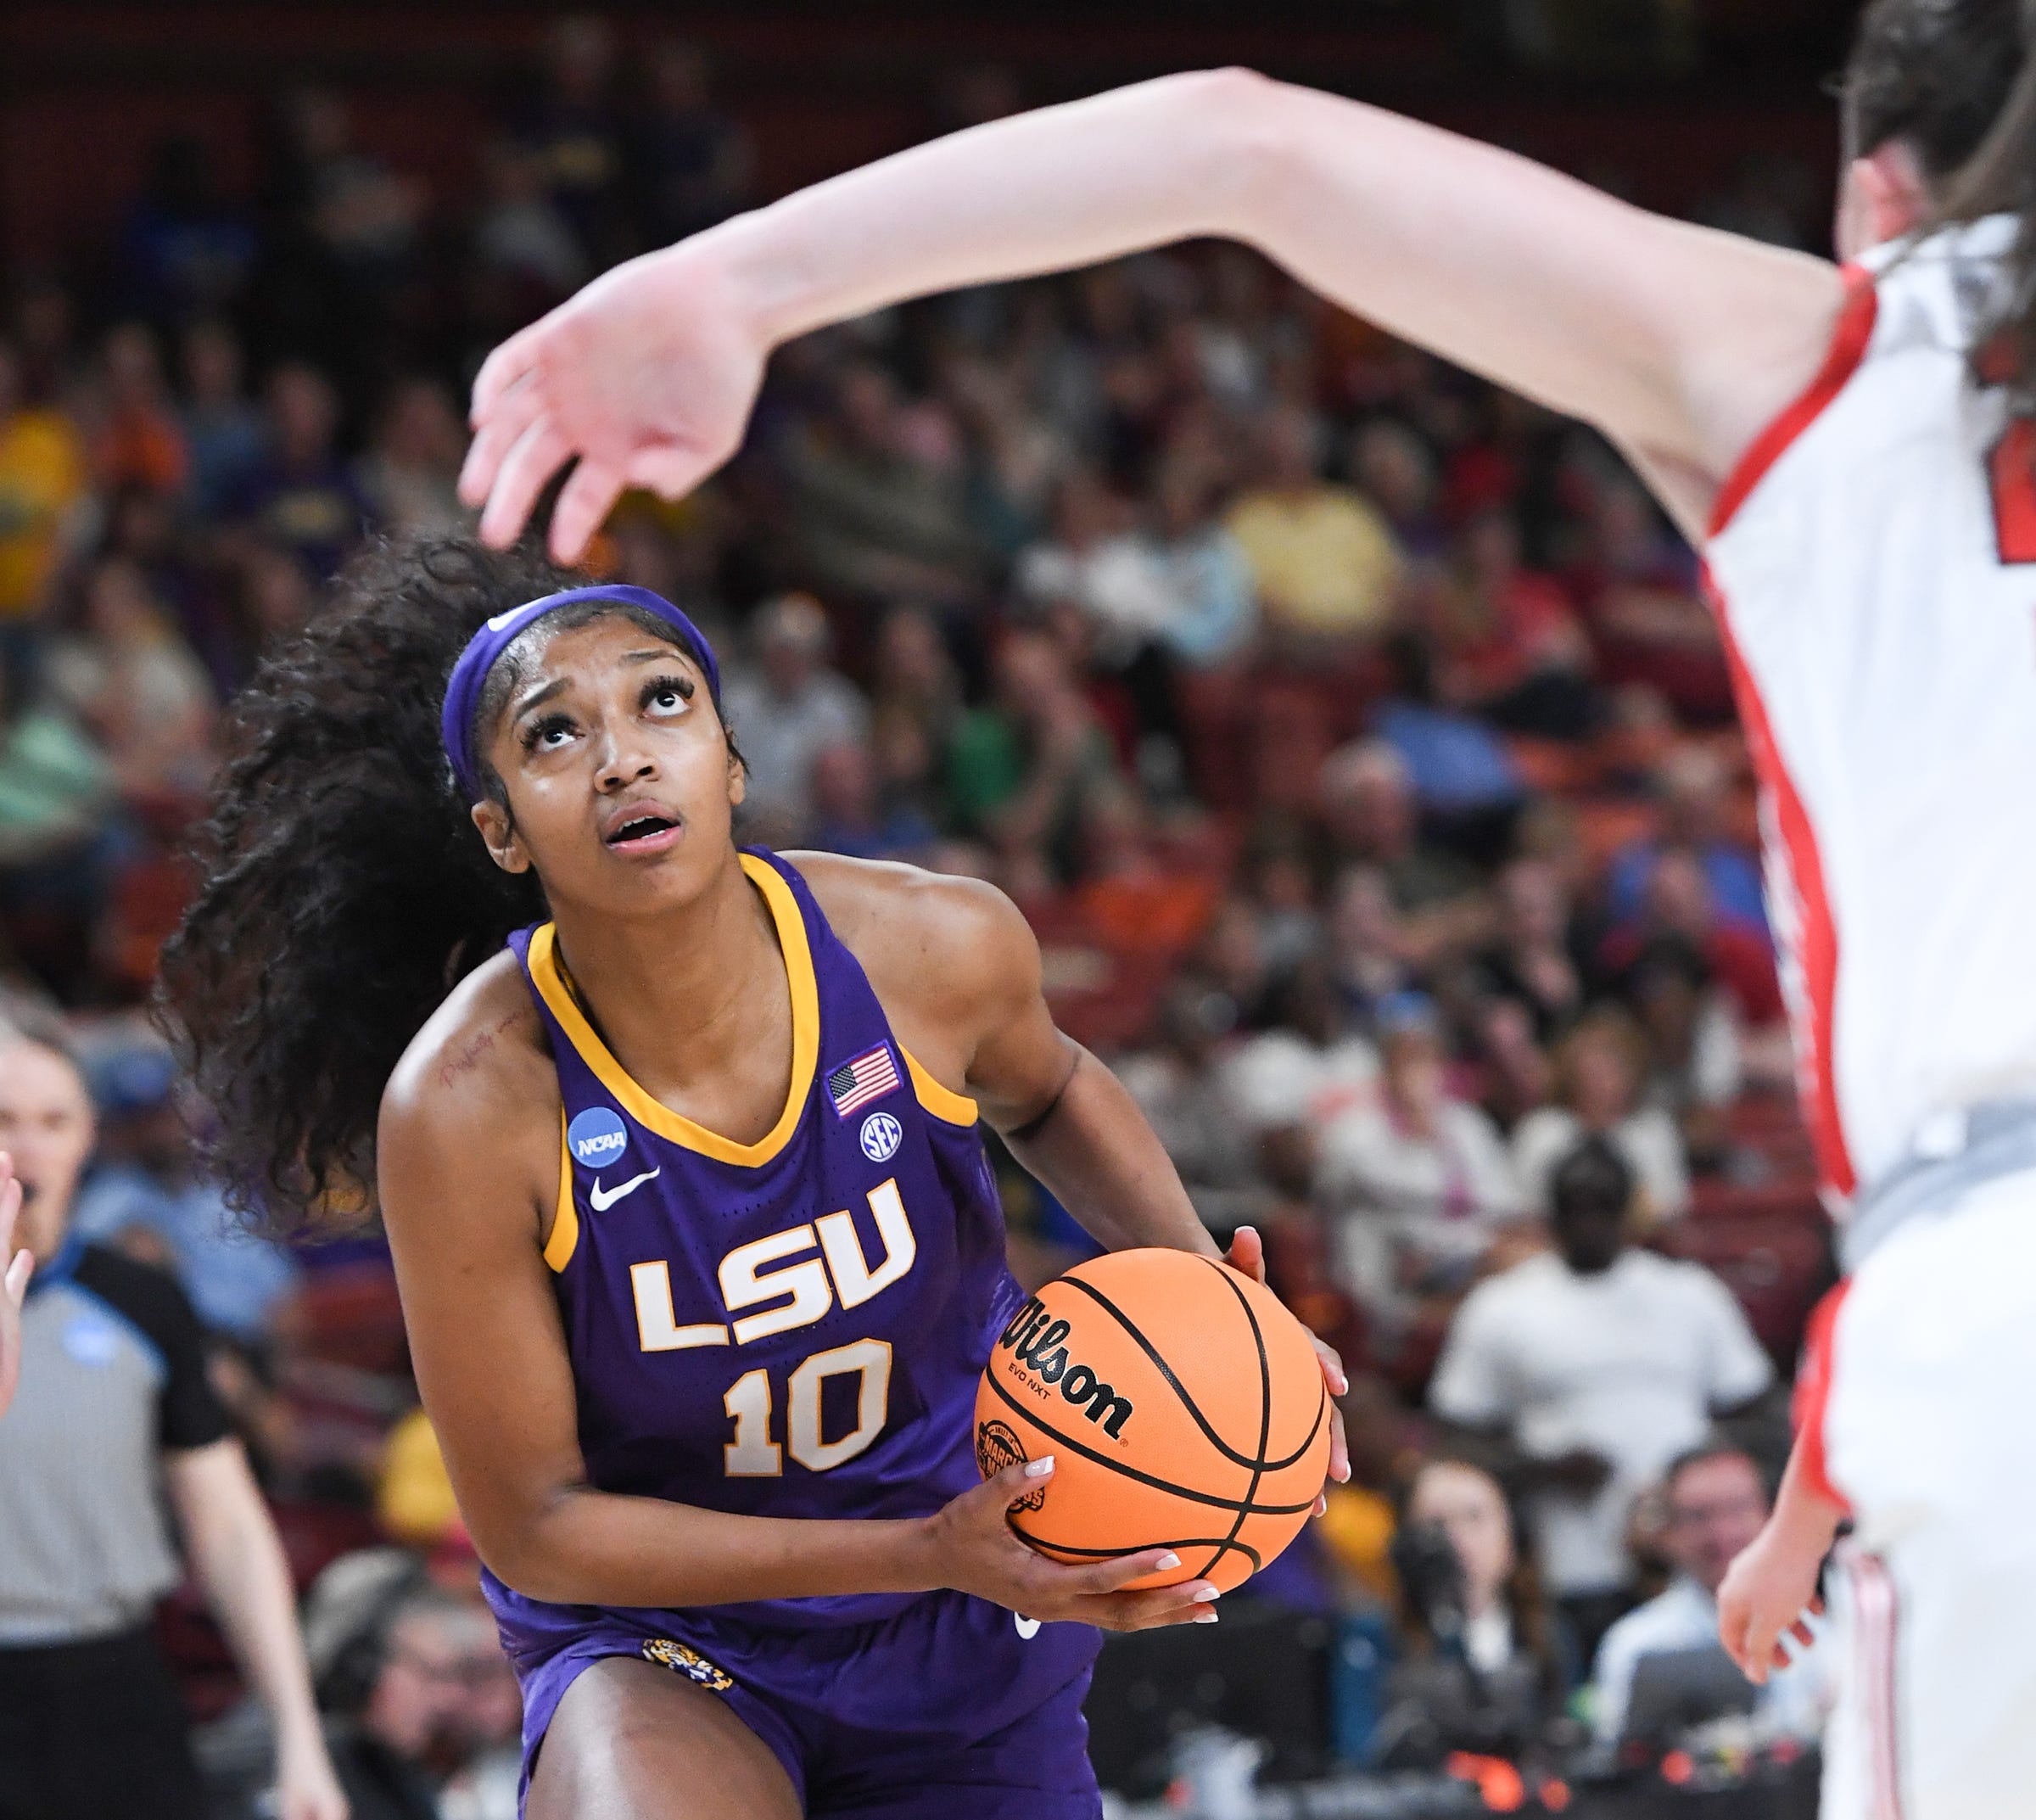 Louisiana State University forward Angel Reese (10) scores against Utah during the fourth quarter of the Sweet 16 round of the NCAA Women's Tournament at Bon Secours Wellness Arena in Greenville, S.C. Friday, March 24, 2023.